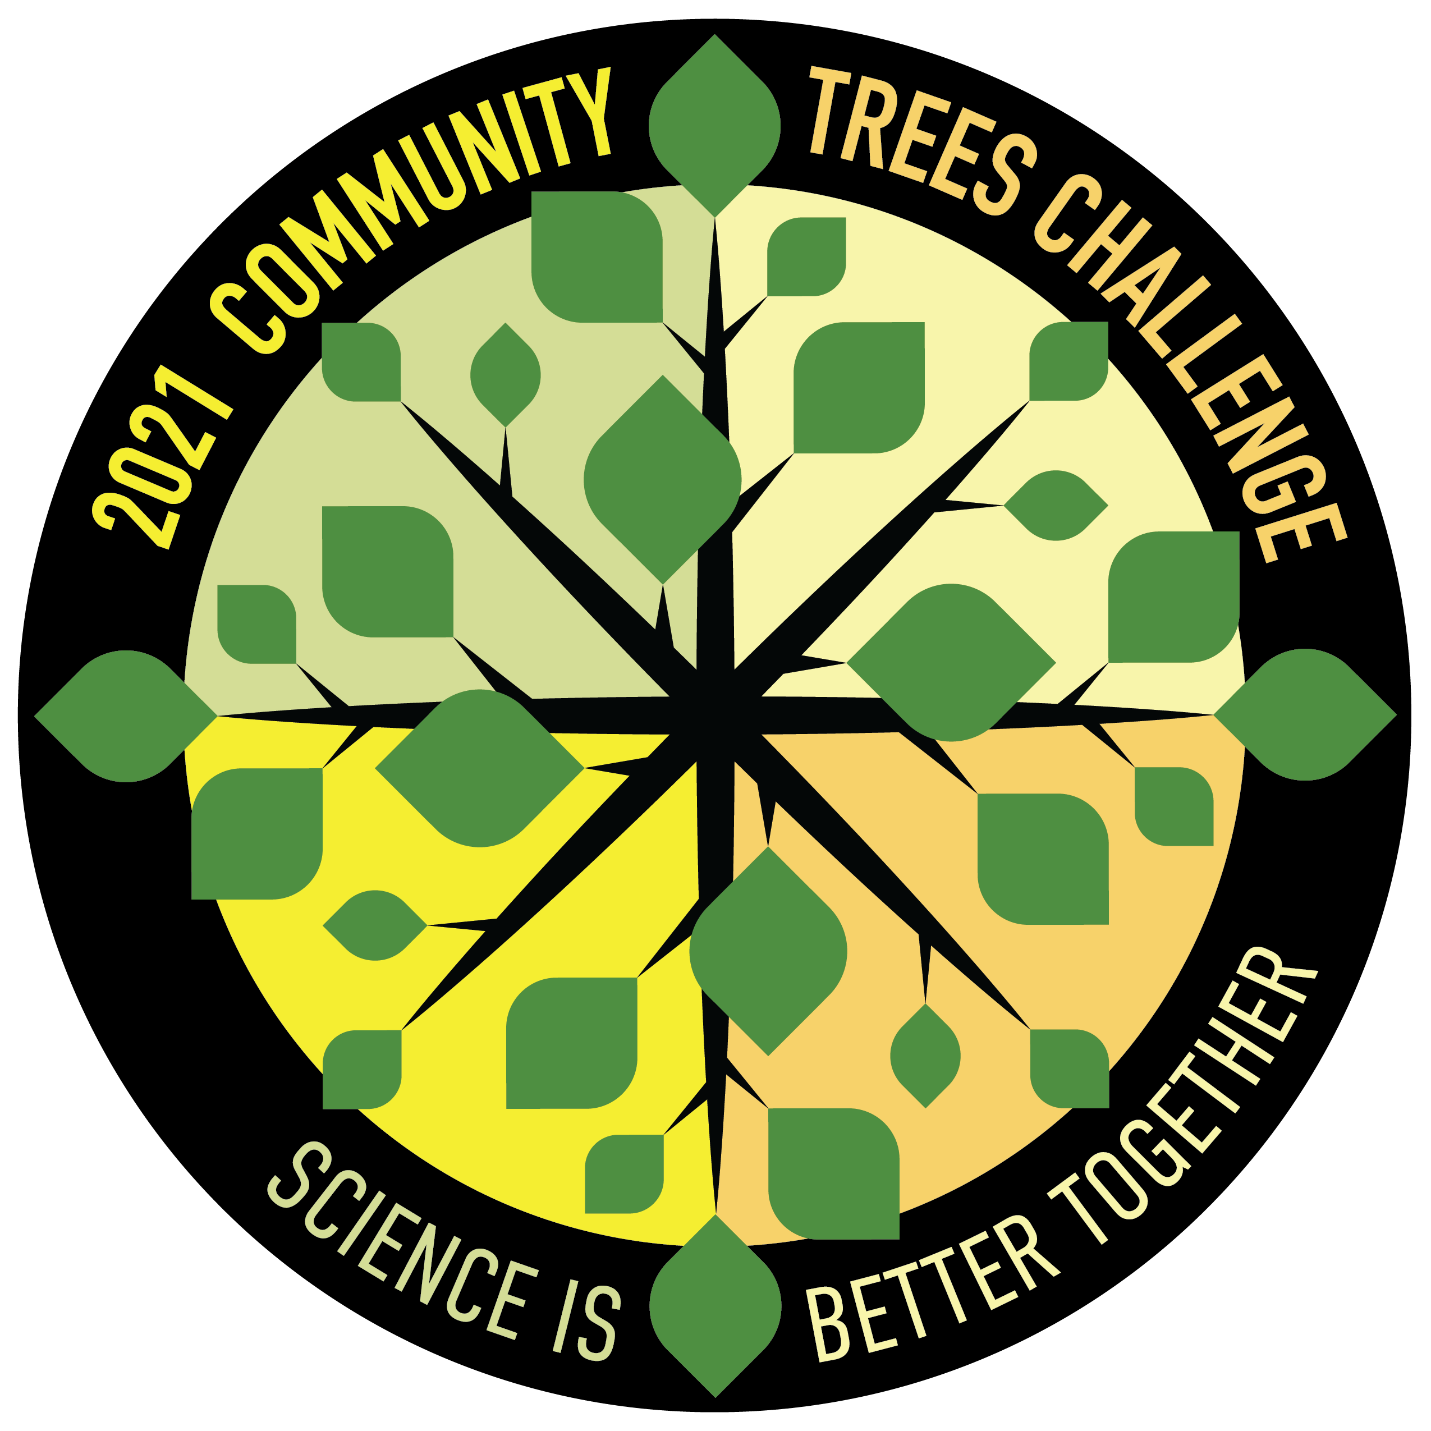 2021 Community Trees Challenge shareable